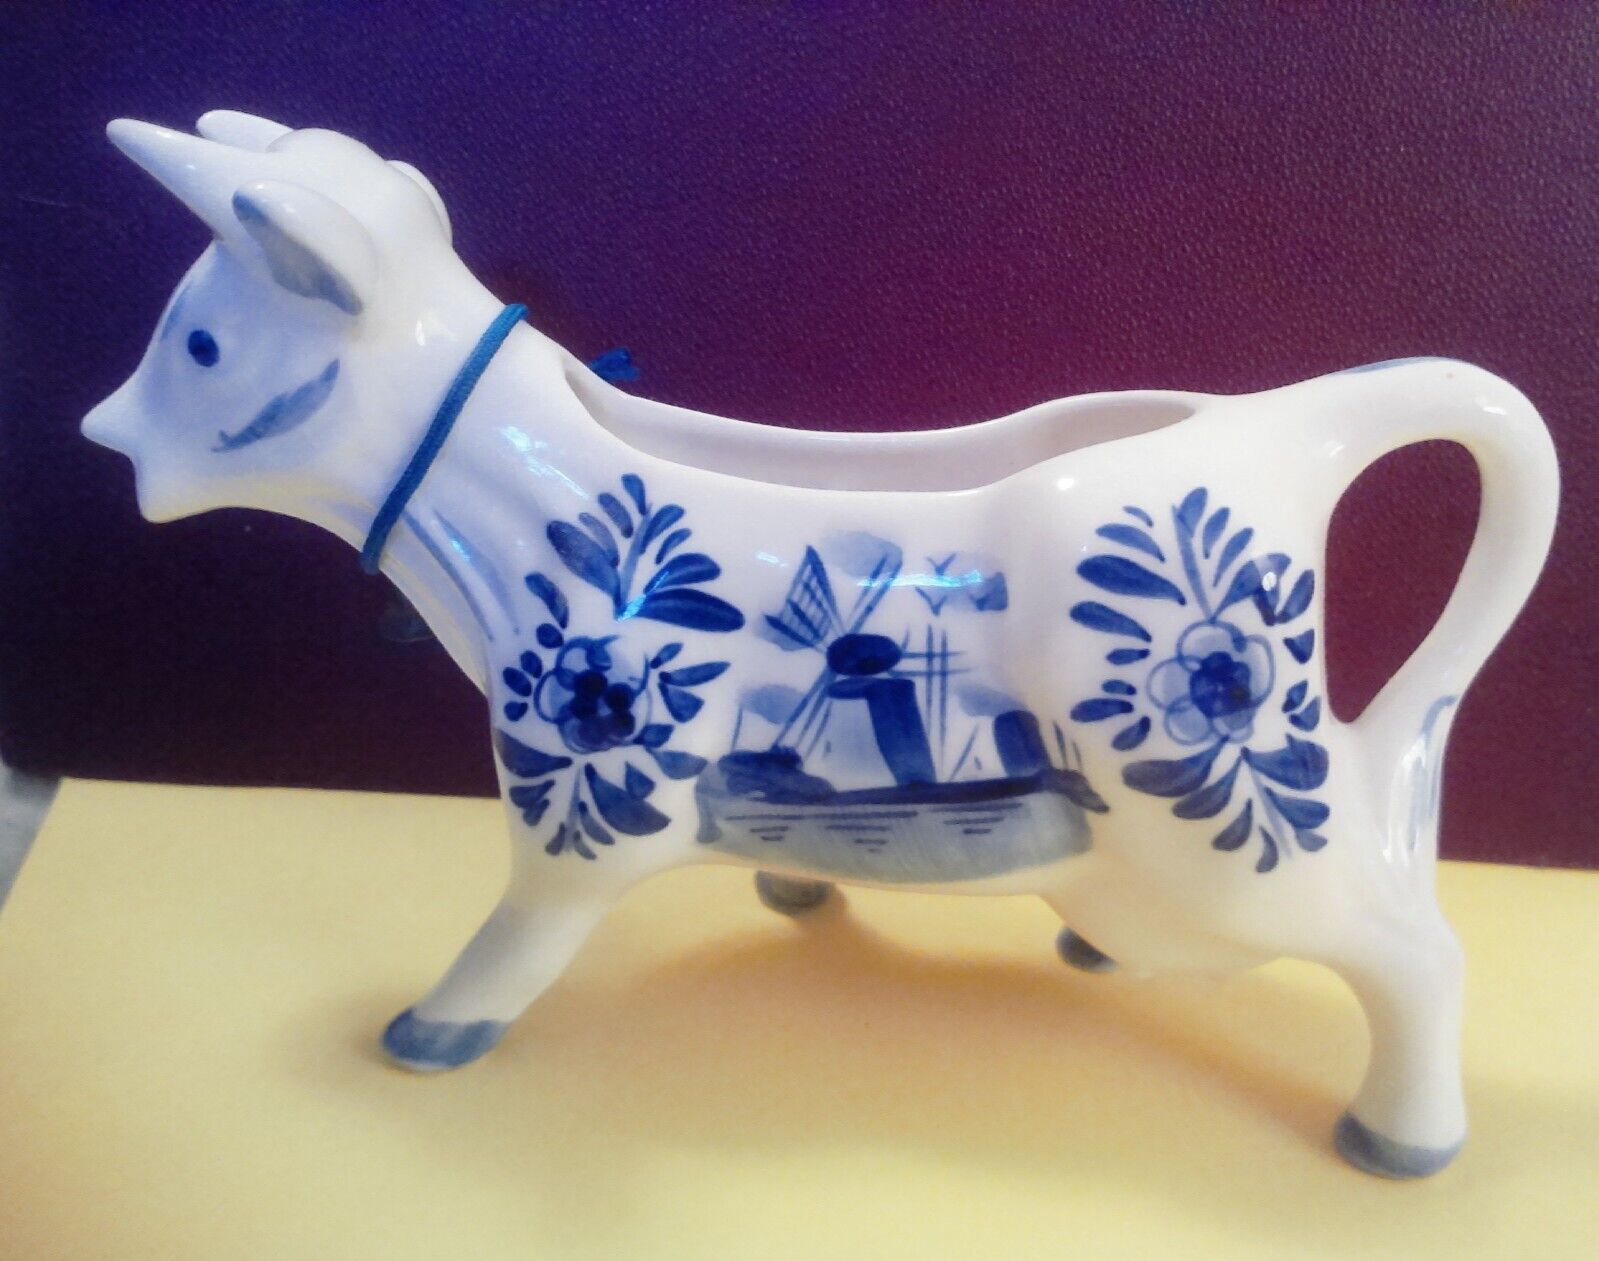 Adorable Handcrafted Delft Blue Cow Milk Pitcher with bell around the neck